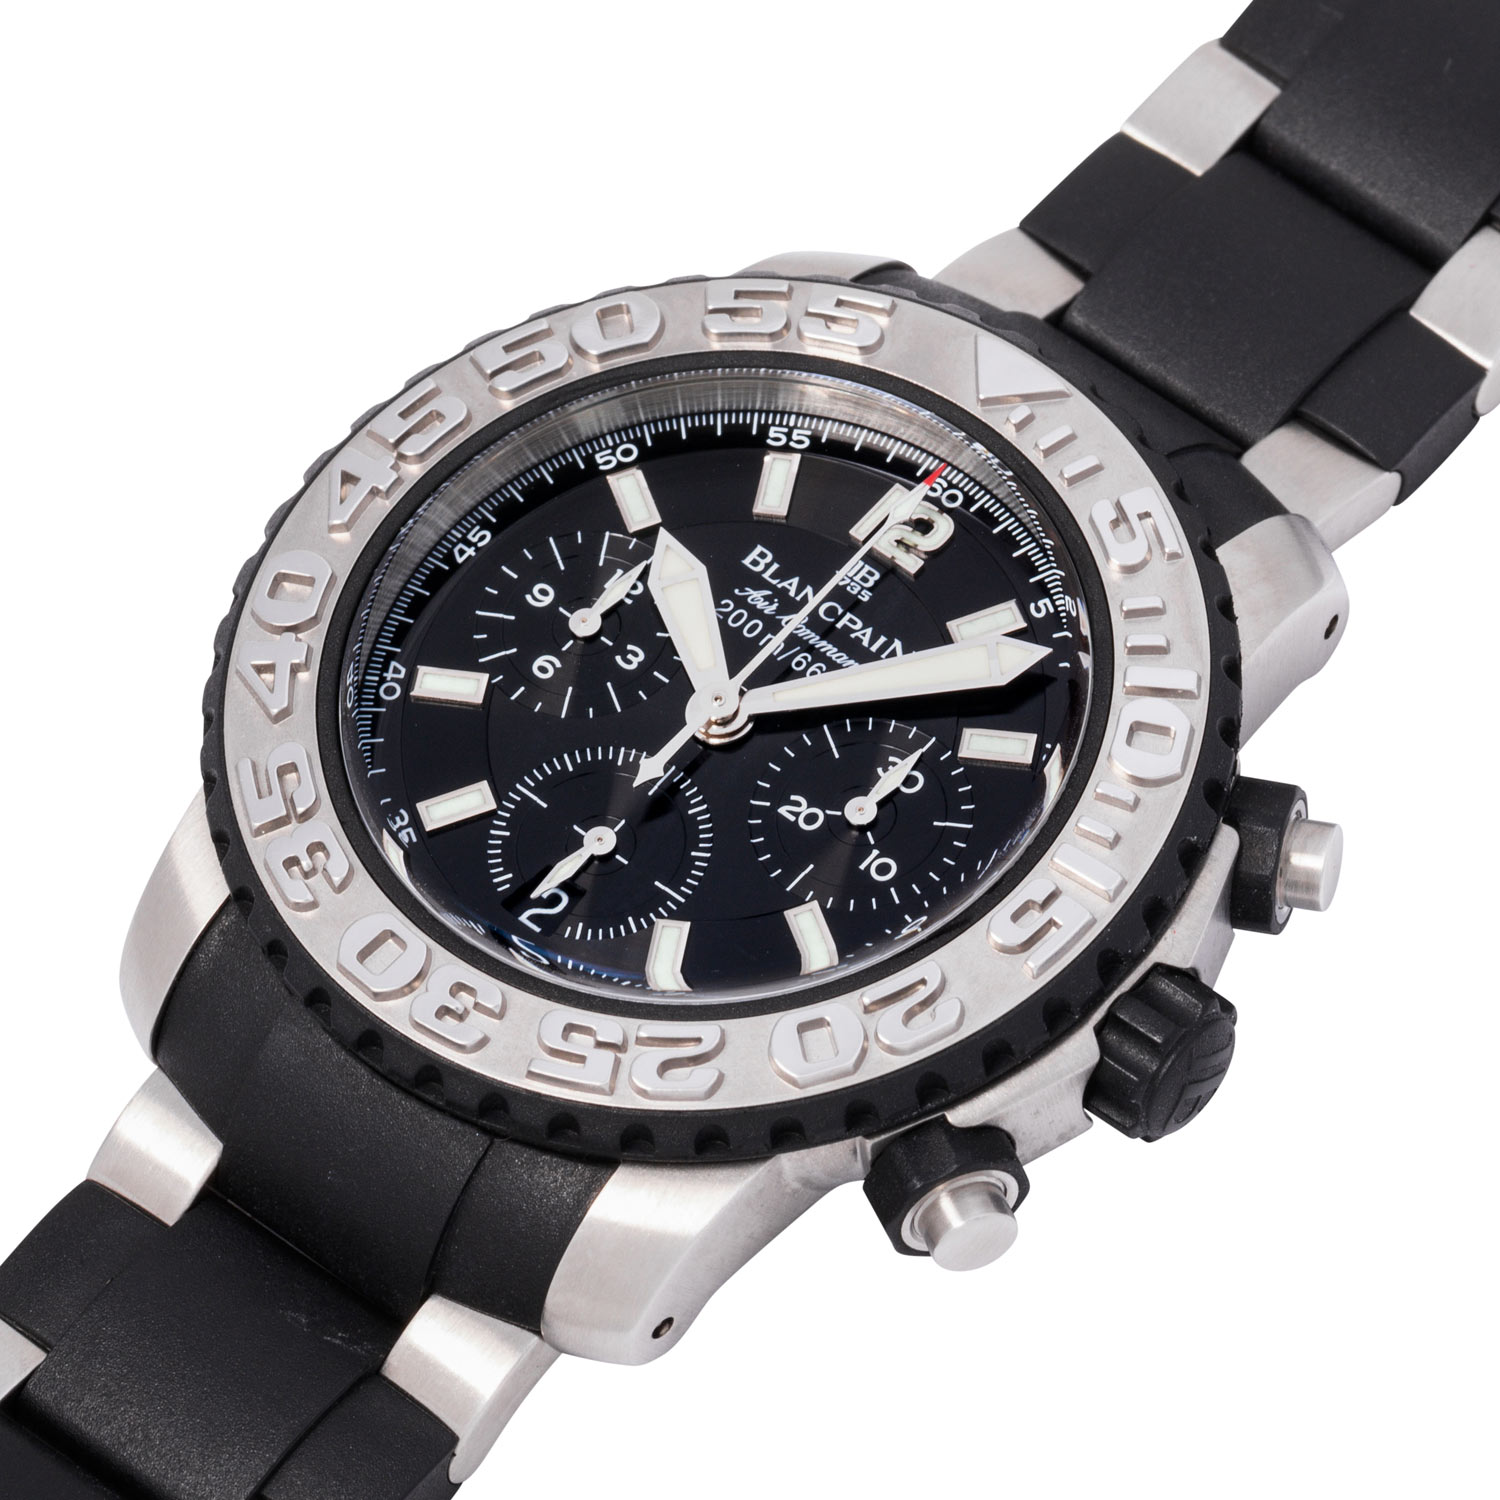 BLANCPAIN Air Command Concept 2000 Ref. 2285F Herren Chronograph. - Image 5 of 8